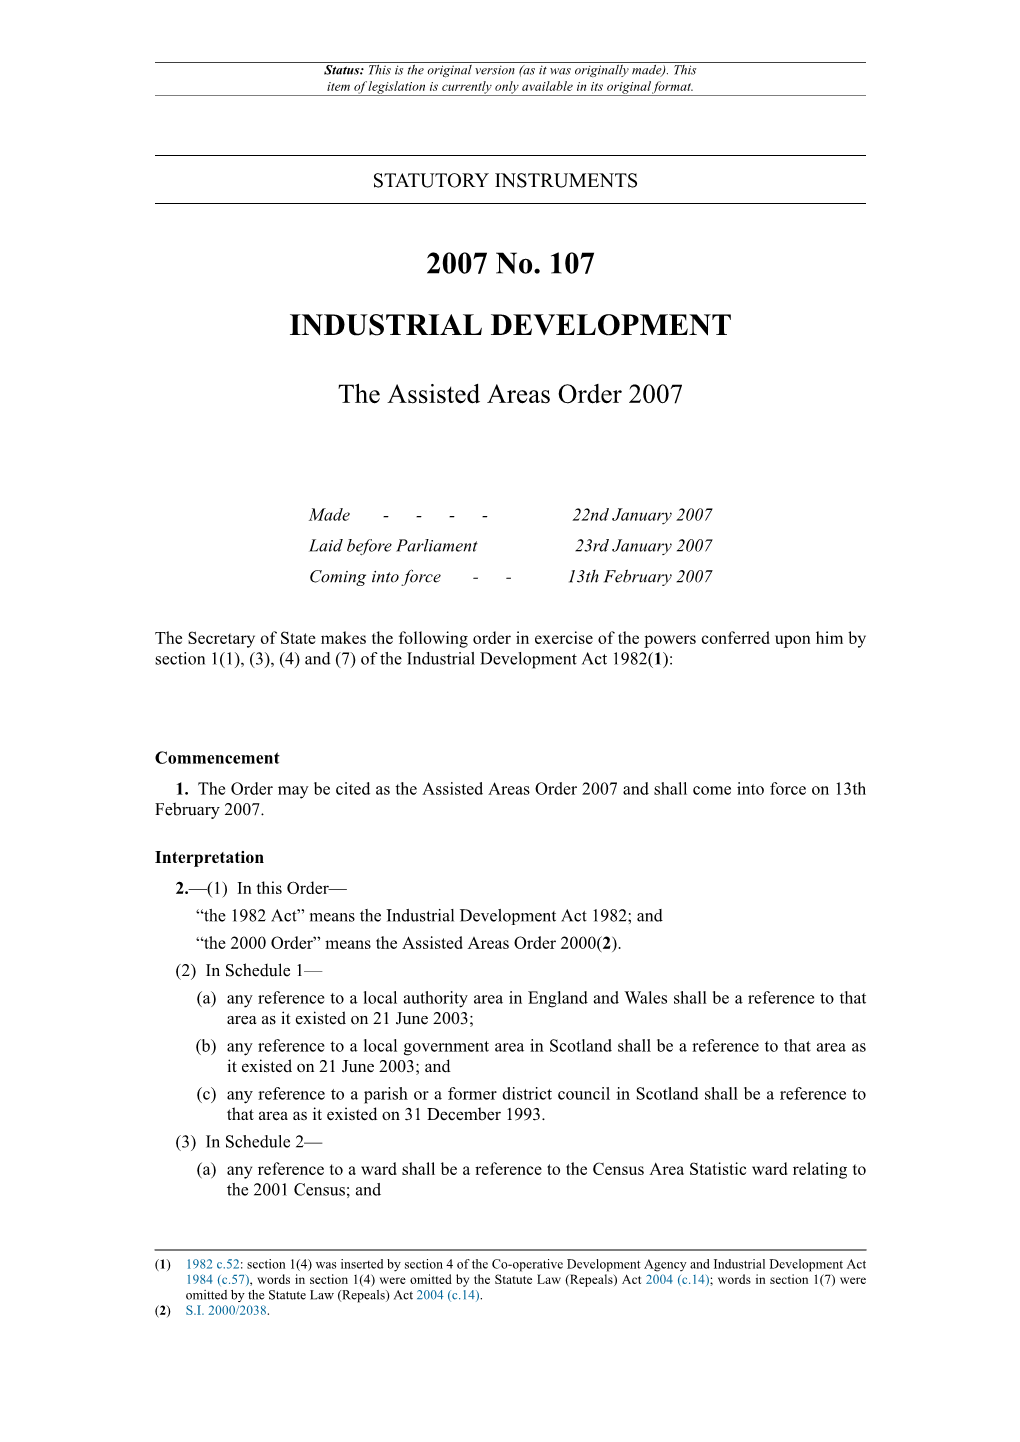 The Assisted Areas Order 2007